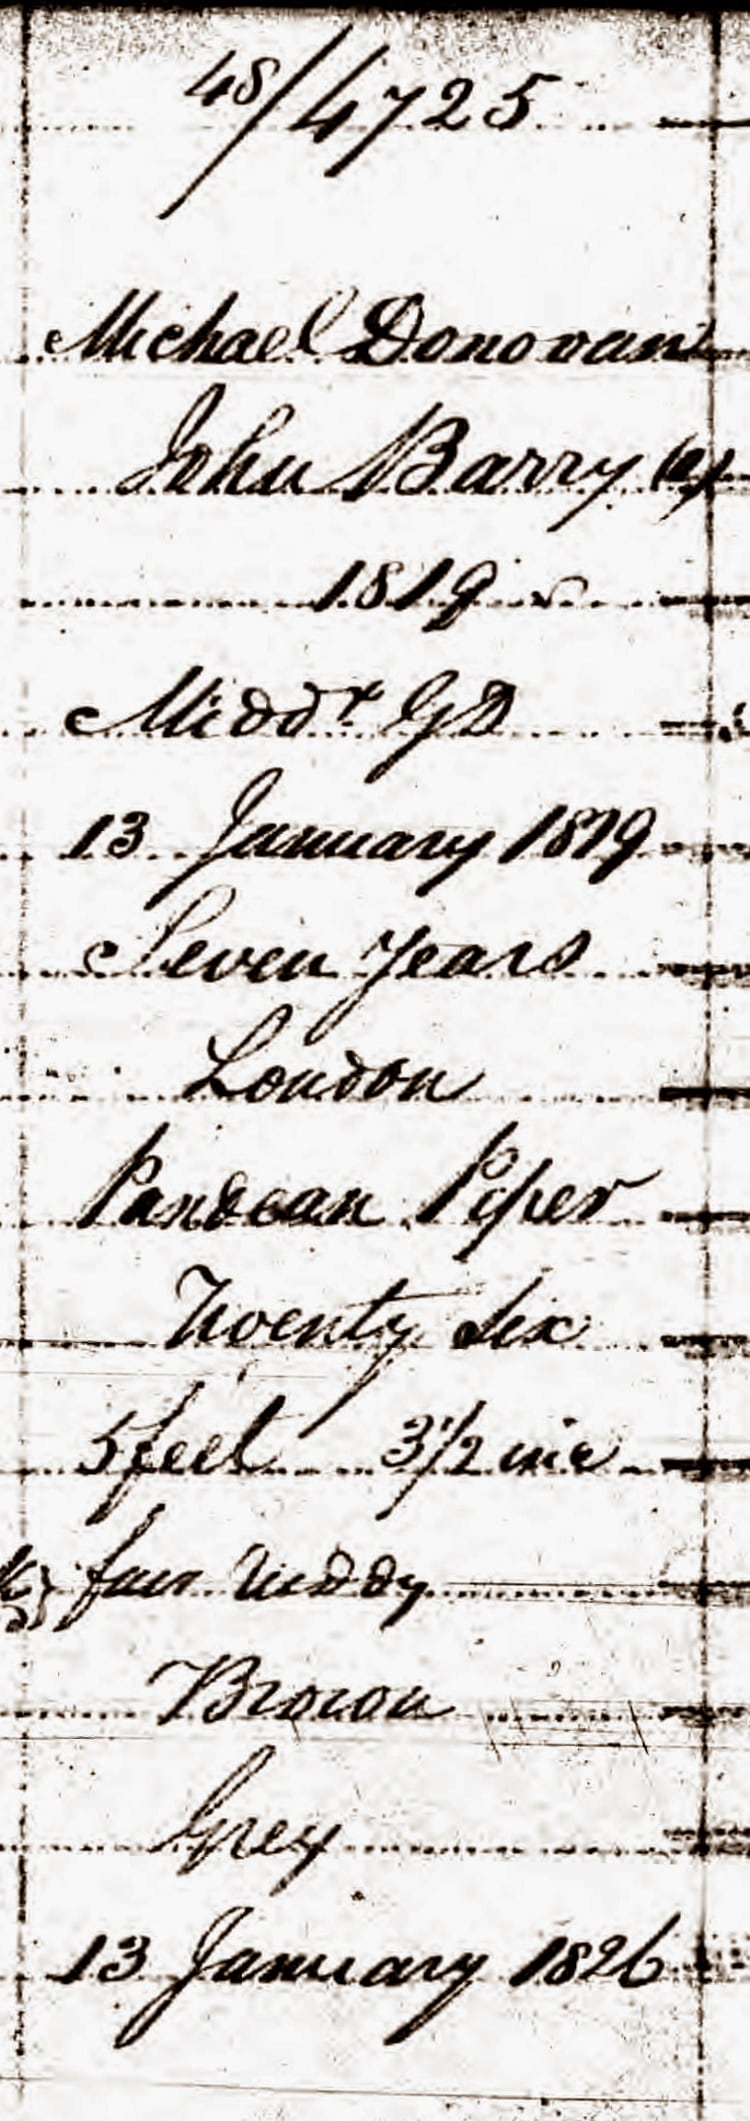 Michael Donovan, Certificate of freedom, 13 January 1826